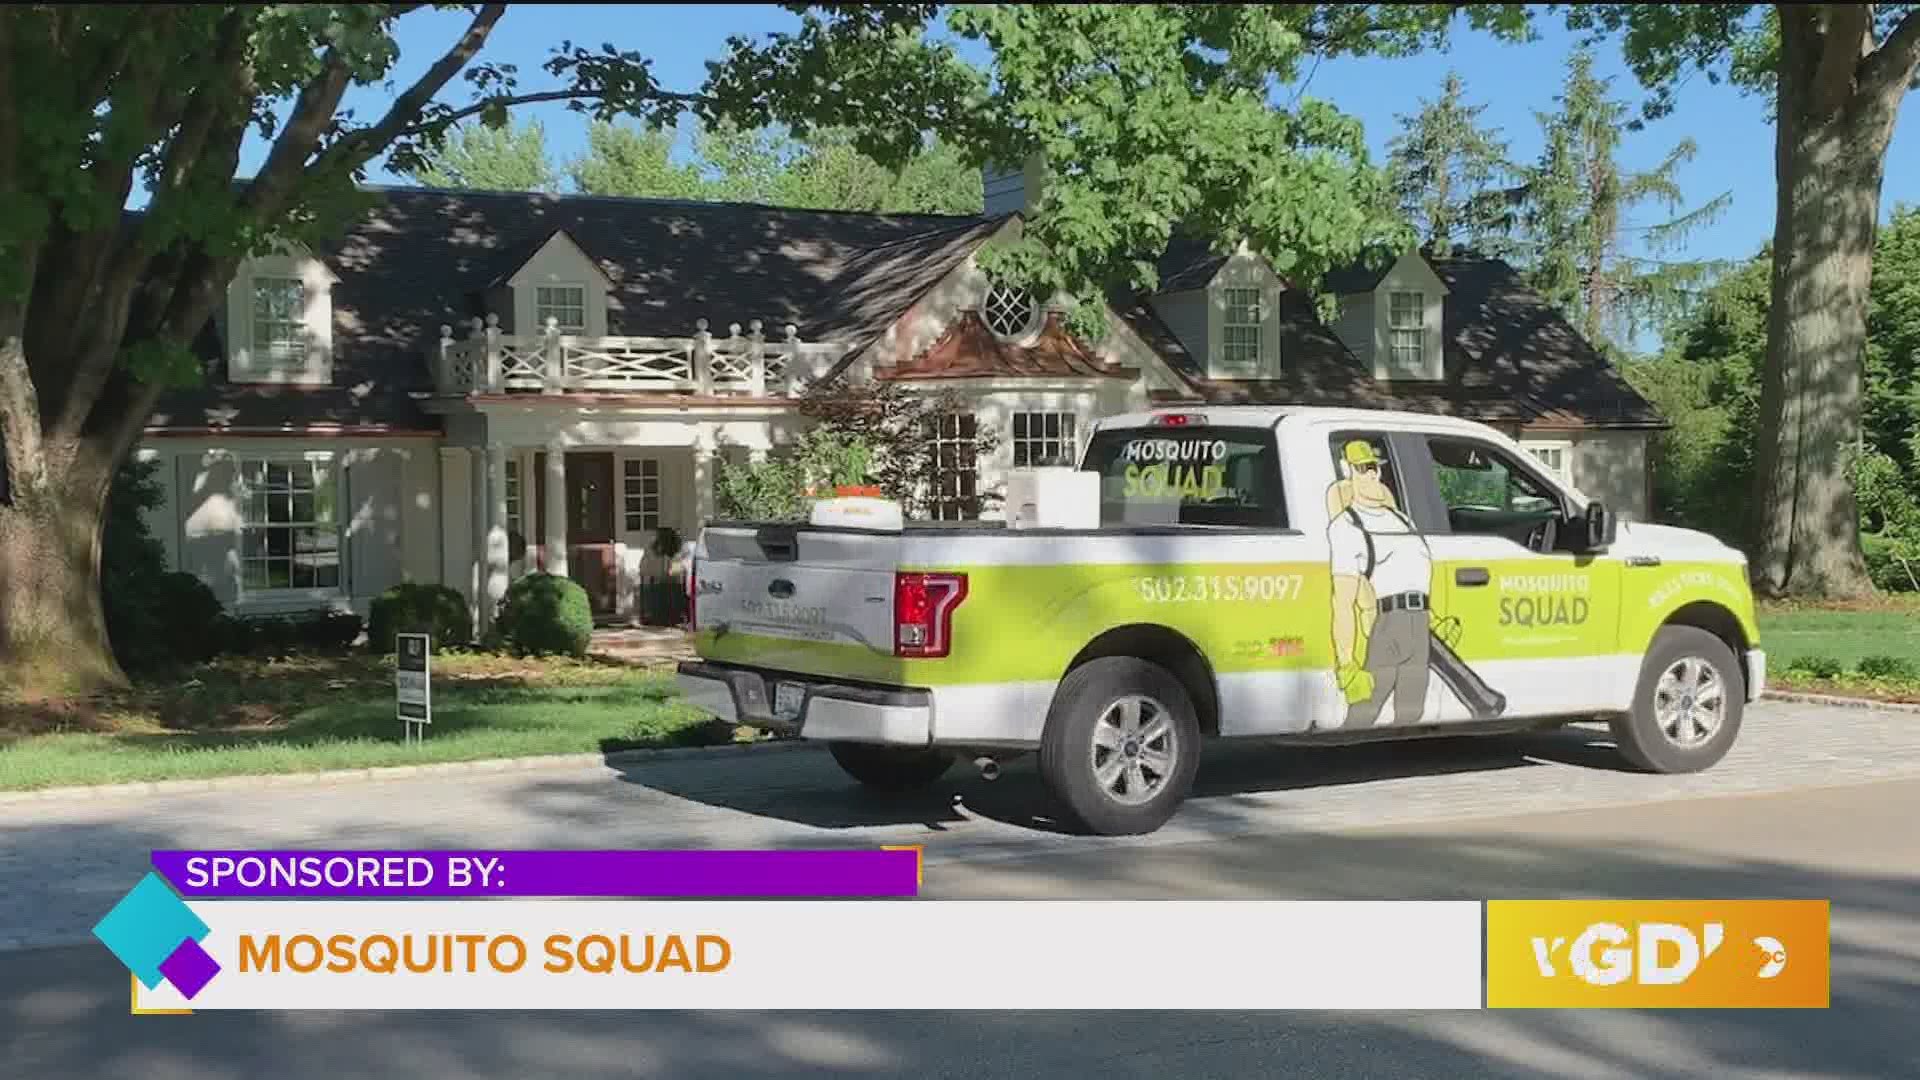 Watch to see what makes Mosquito Squad different than their competitors.